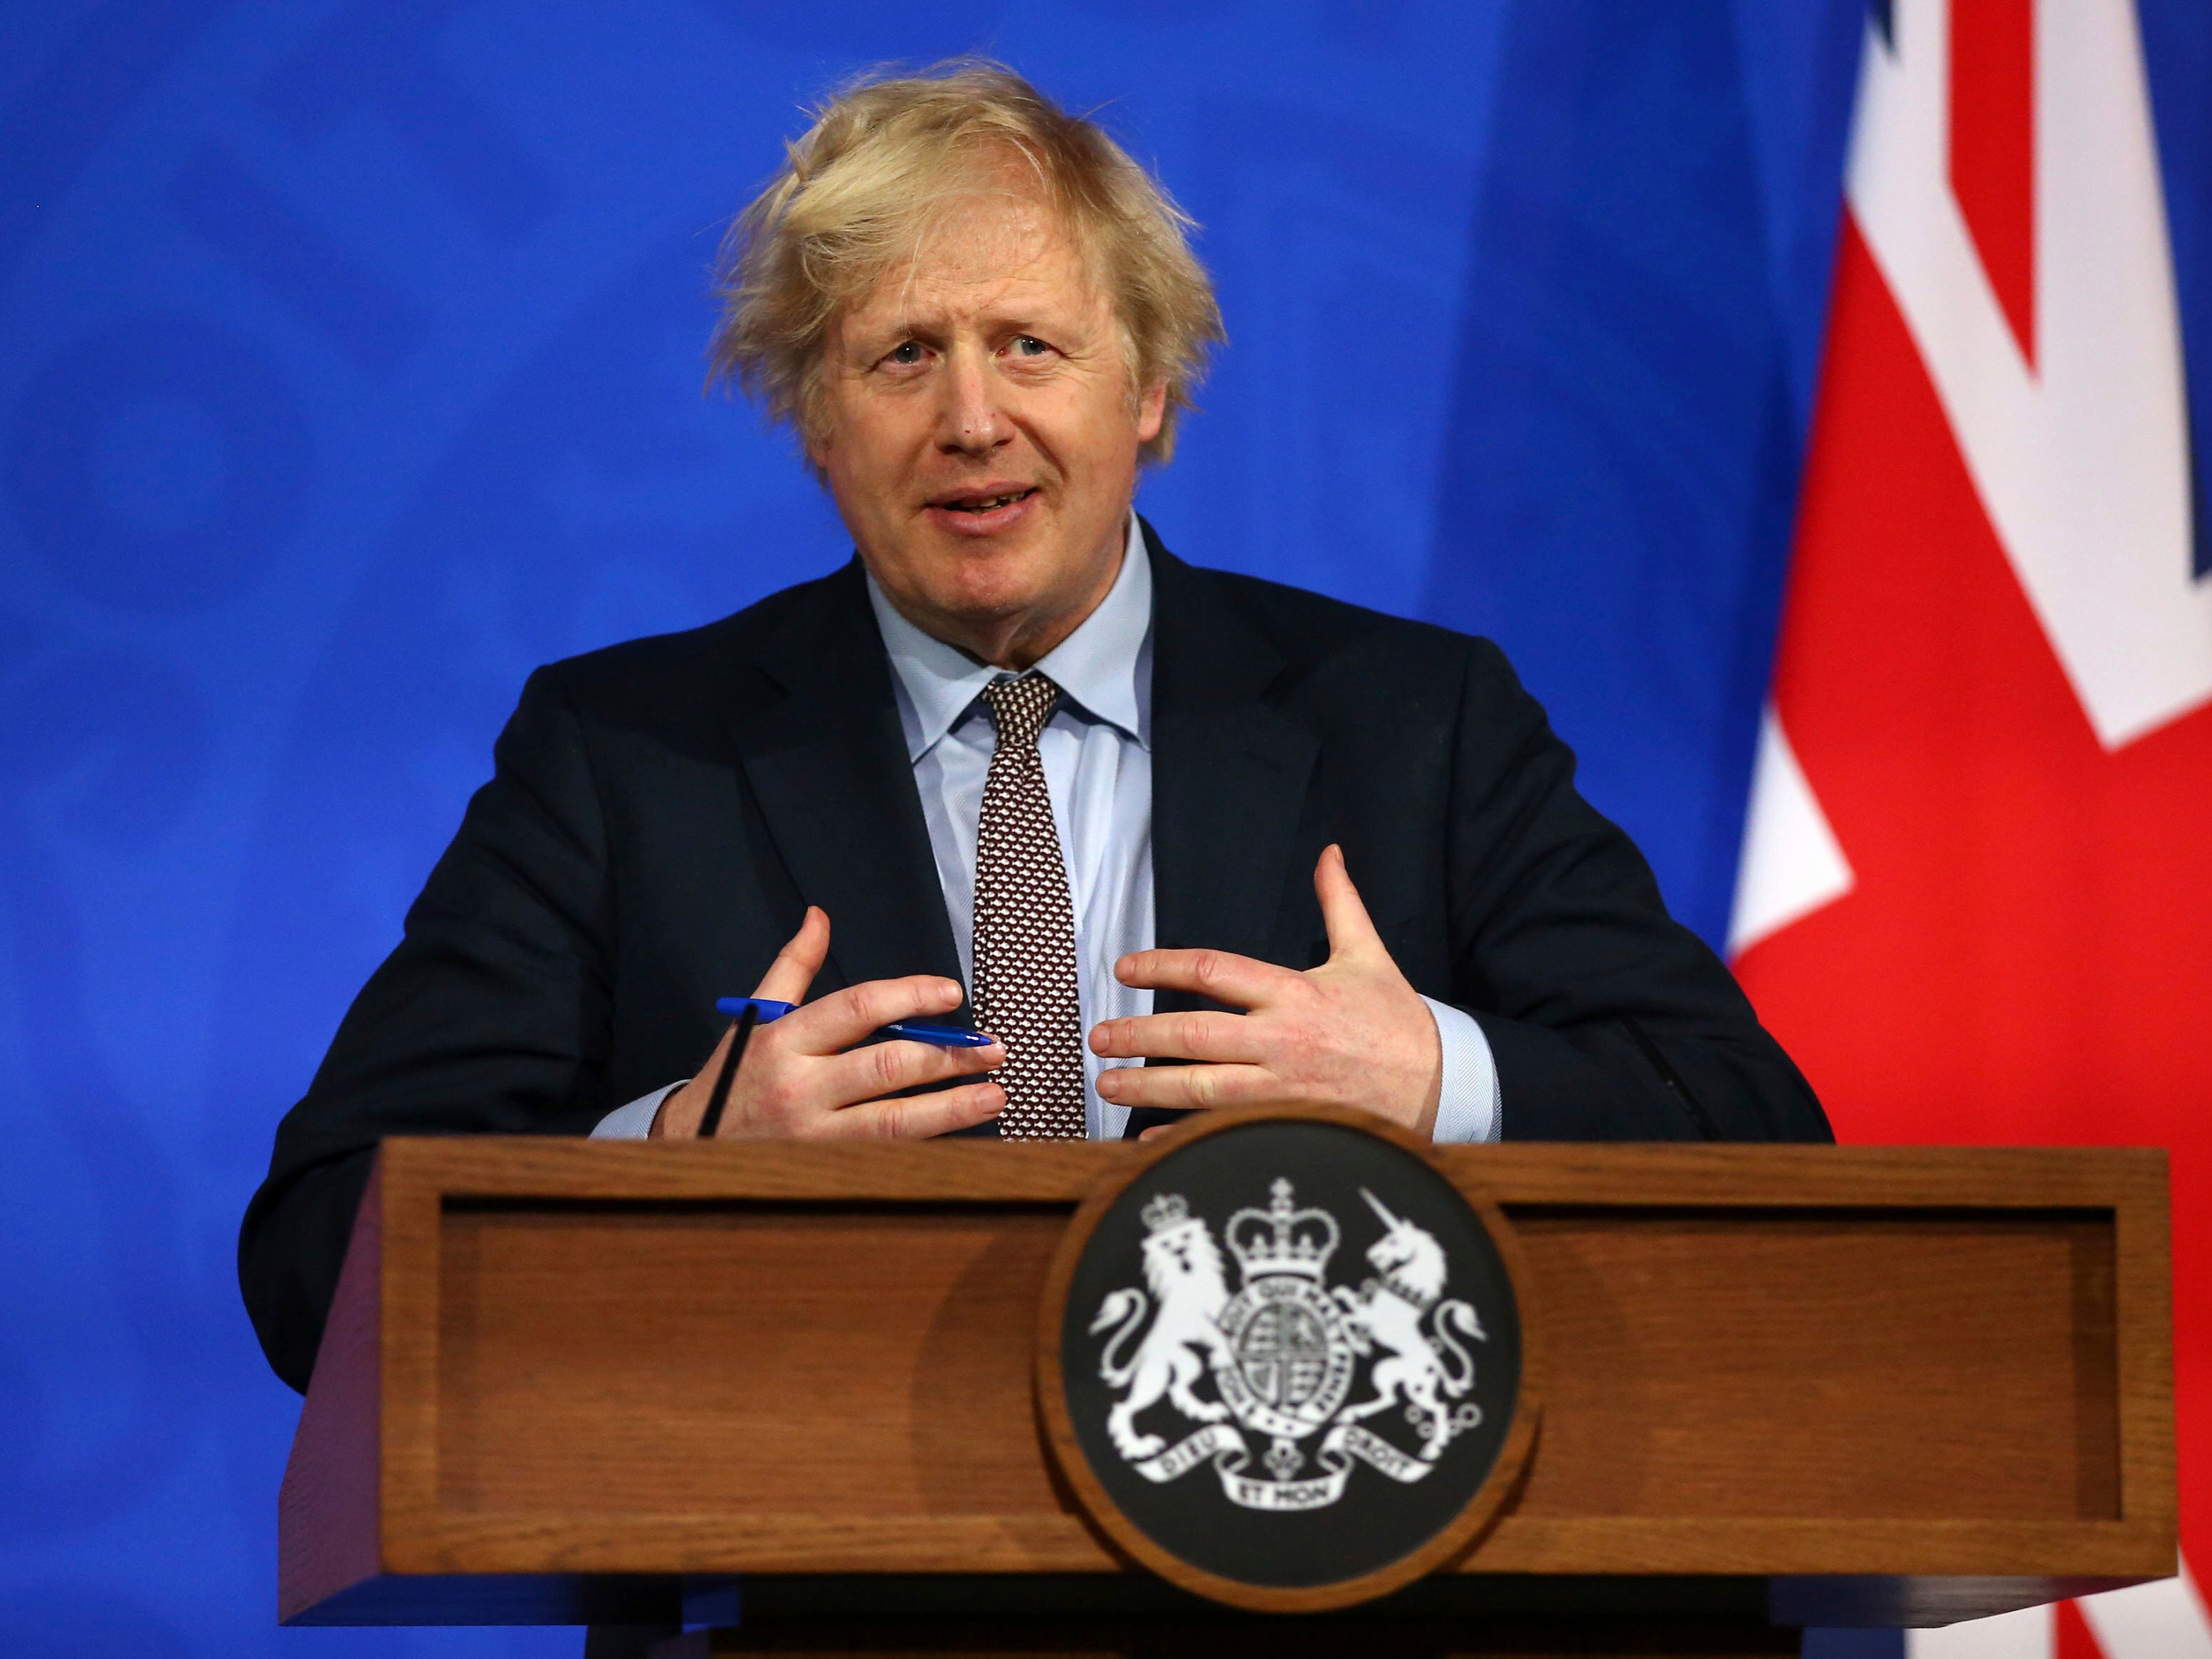 Britain's Prime Minister Boris Johnson speaks during a media briefing on COVID-19 from Downing Street's media briefing room in London